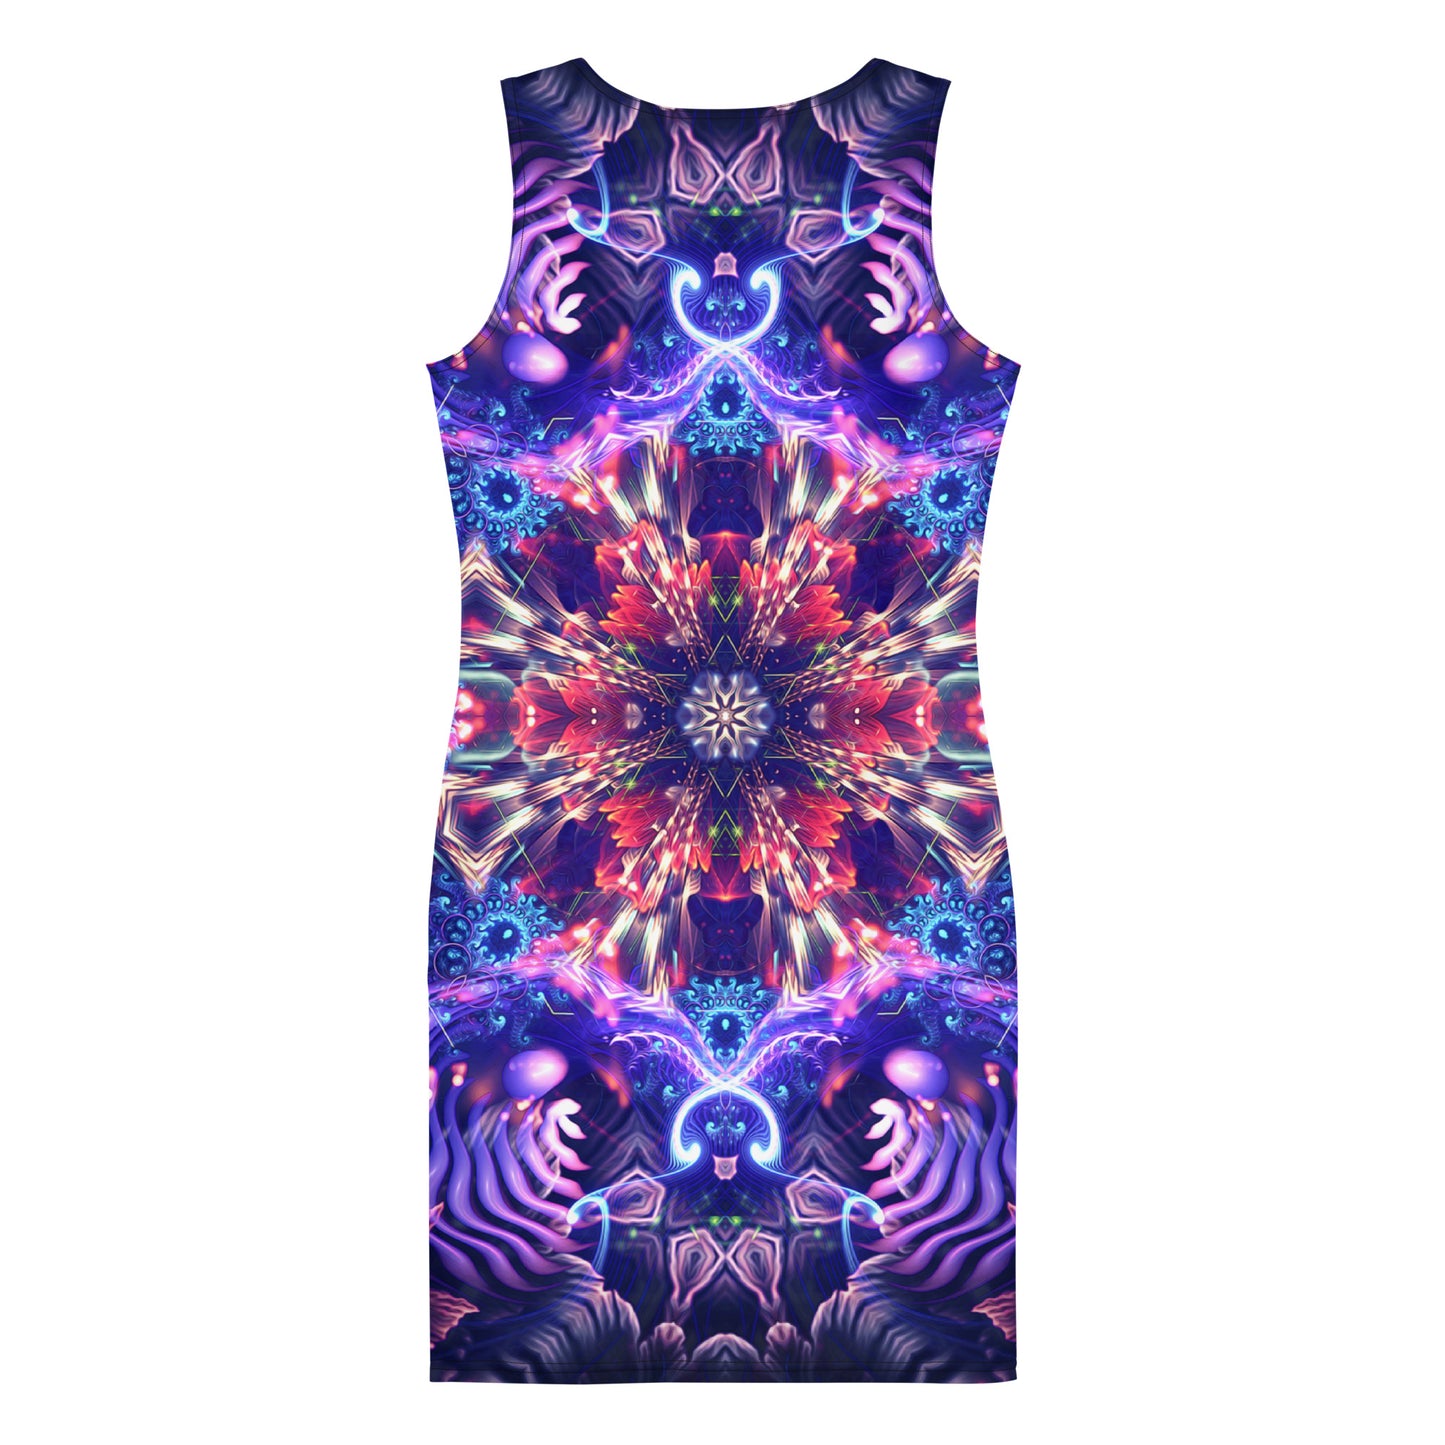 "Flow State" Bodycon FITTED DRESS